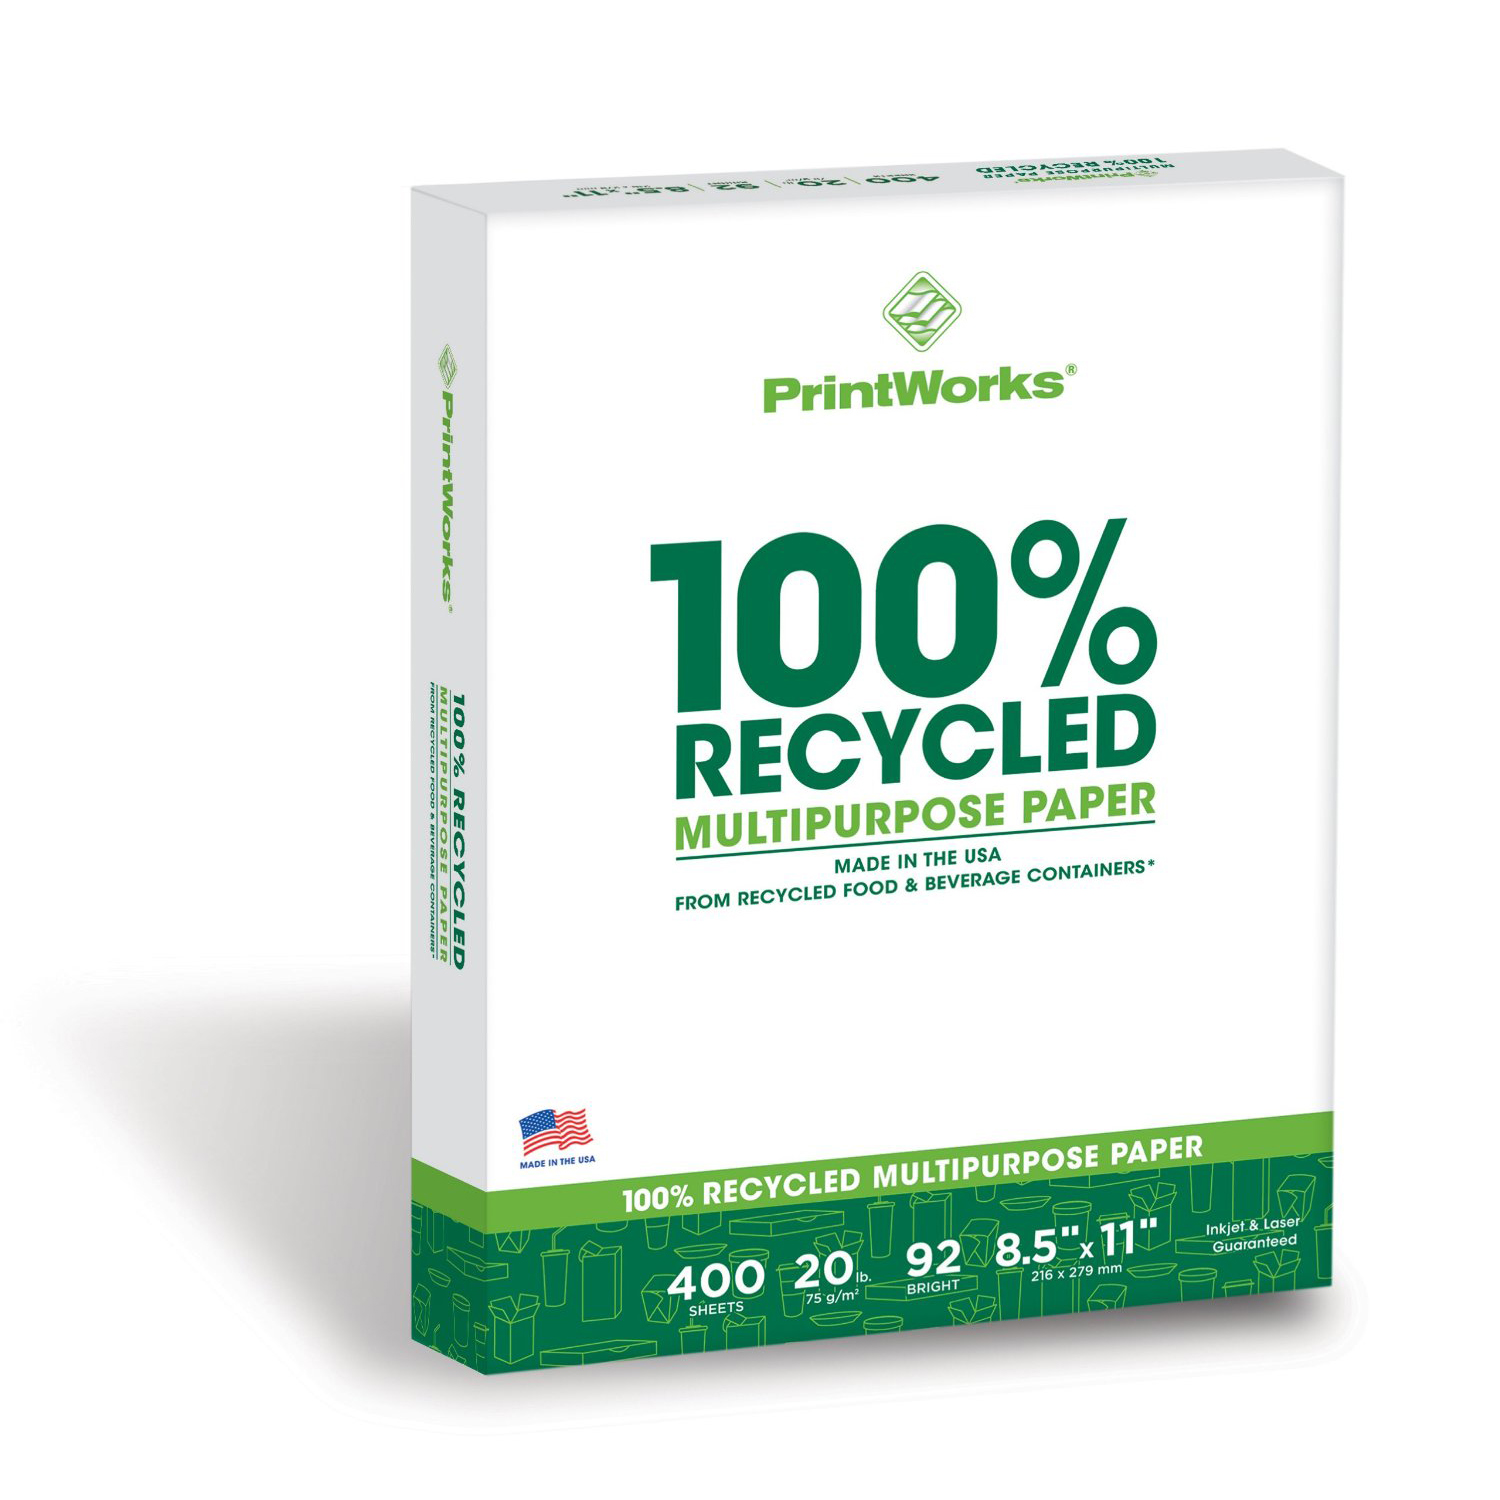 Printworks 00018 100% Recycled Multipurpose Paper 400ct